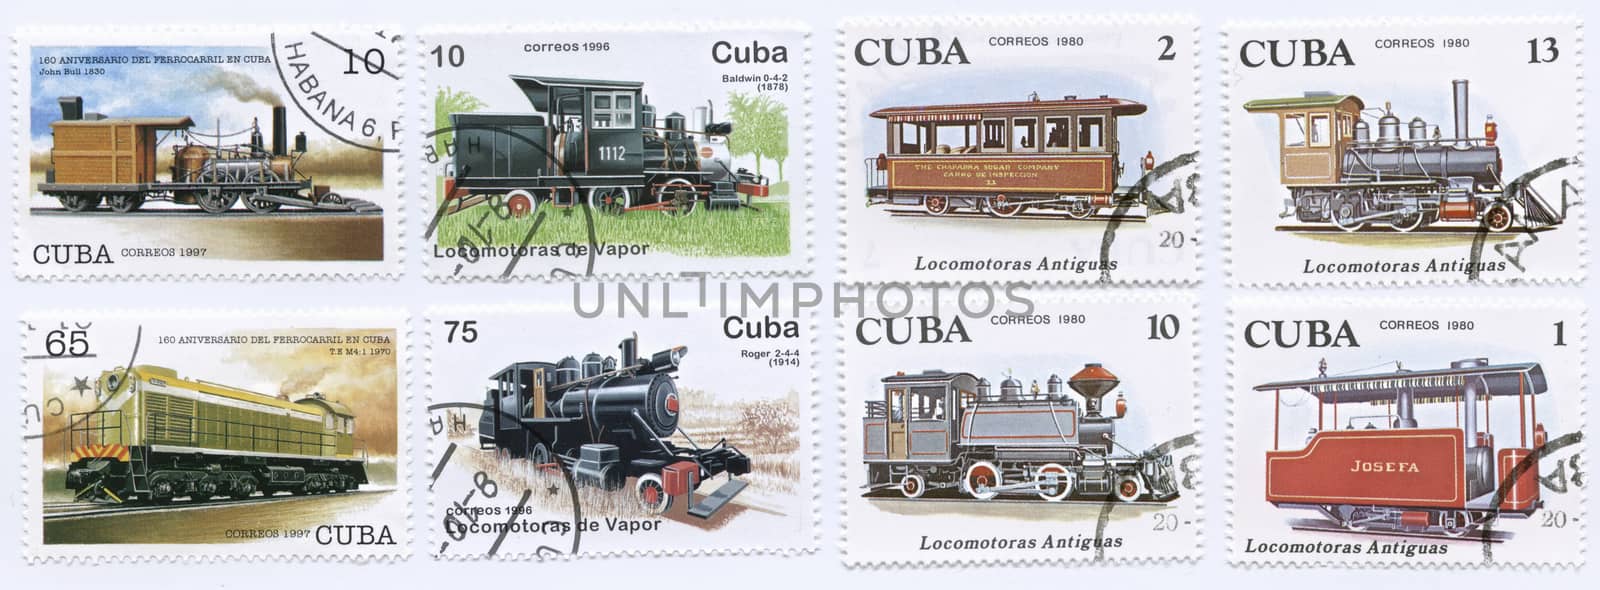 Train Stamps by instinia